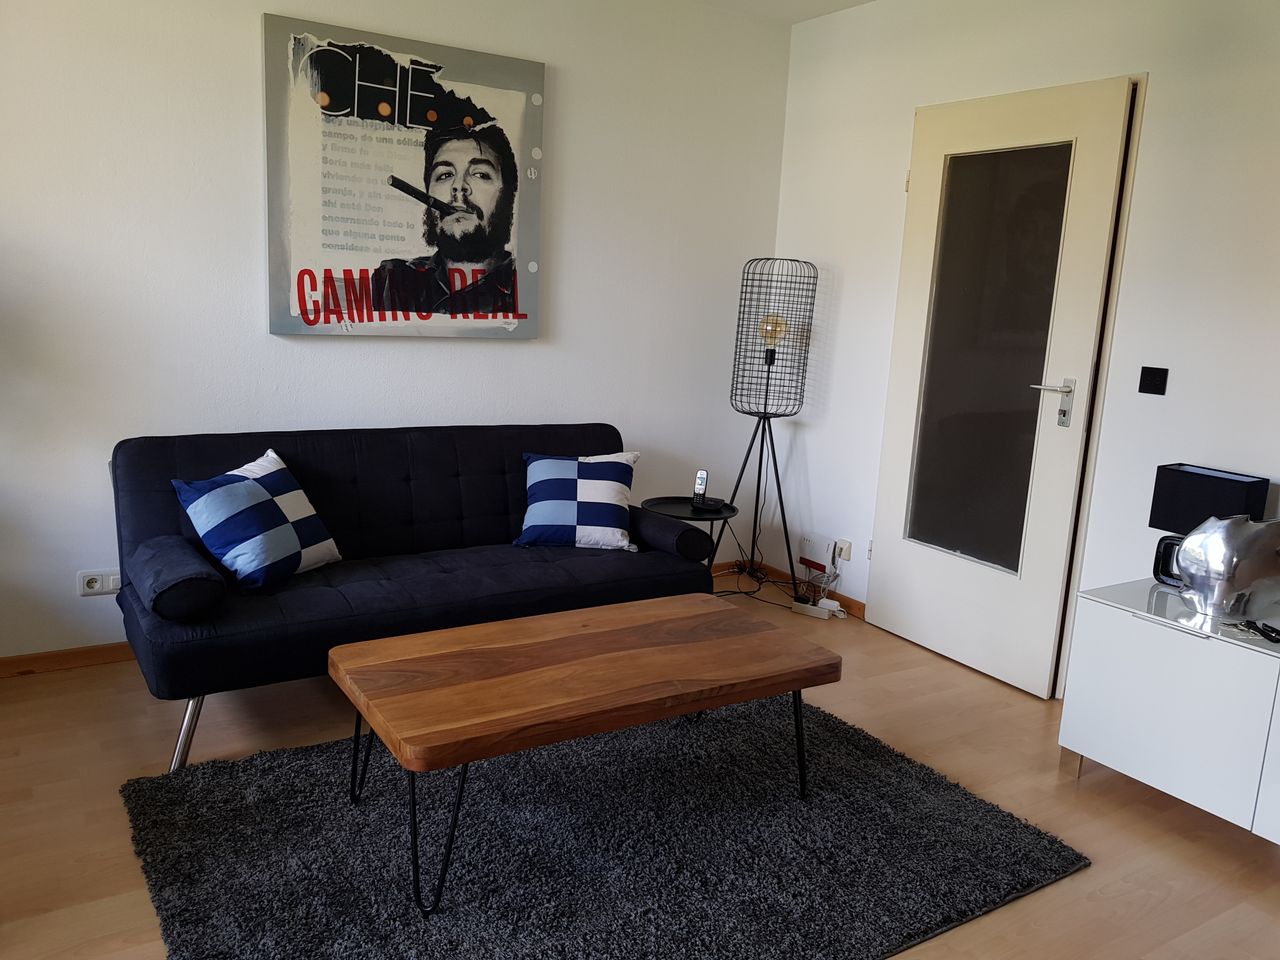 Modernly furnished 1-room apartment in a central and yet quiet location, for long term rental, for immediate rental, at least for 1year with option of extension